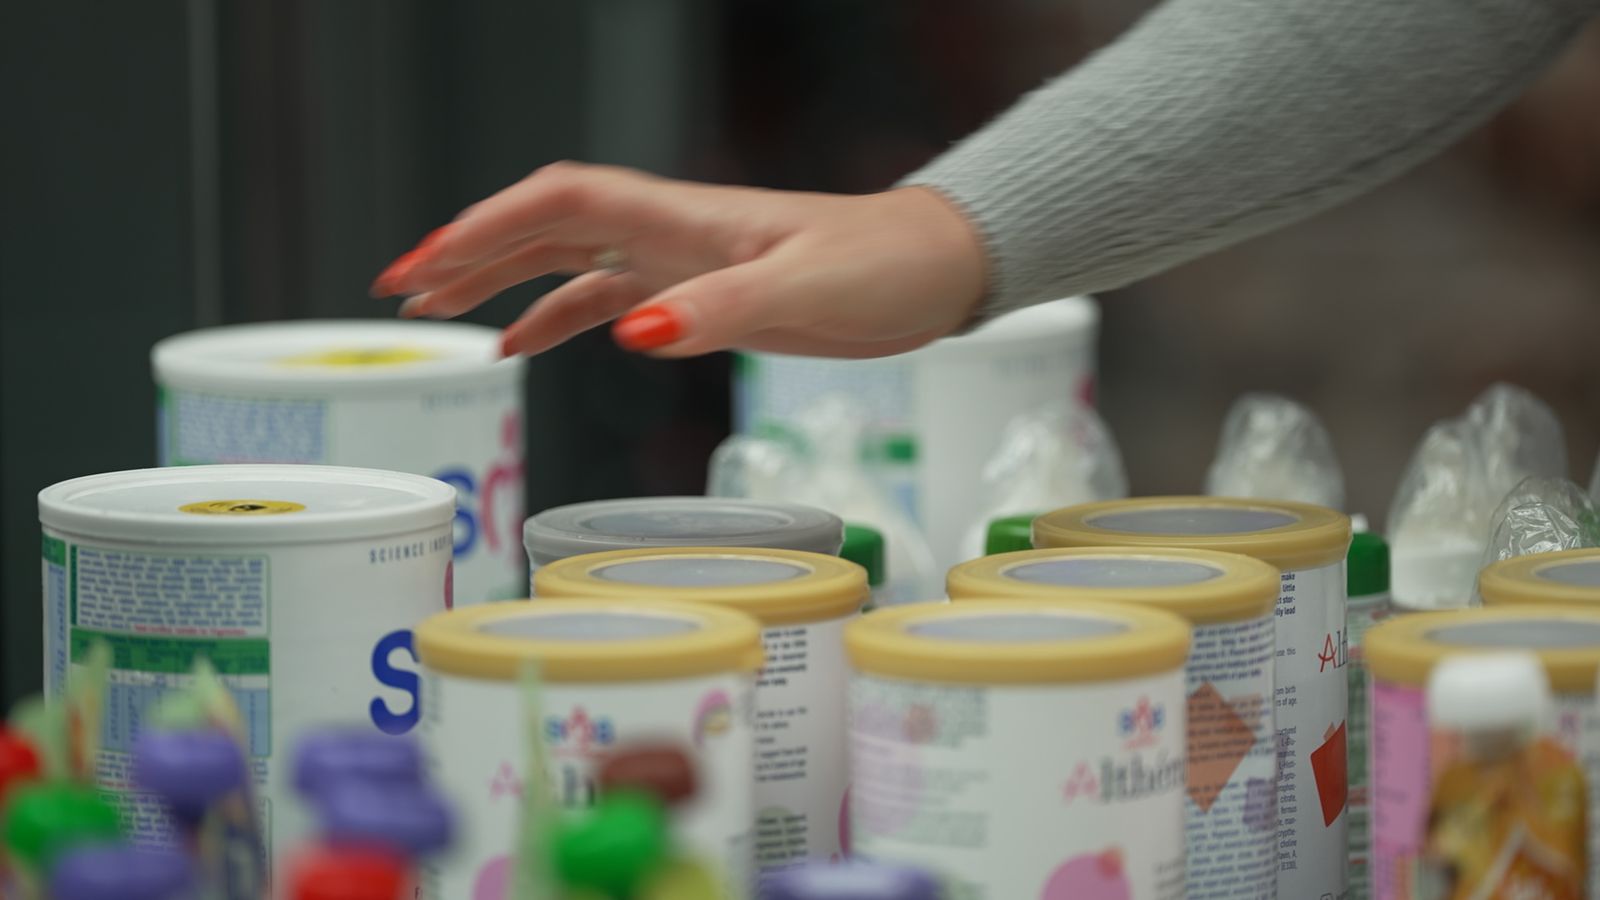 Baby formula prices under scrutiny as cost remains 'historically high'